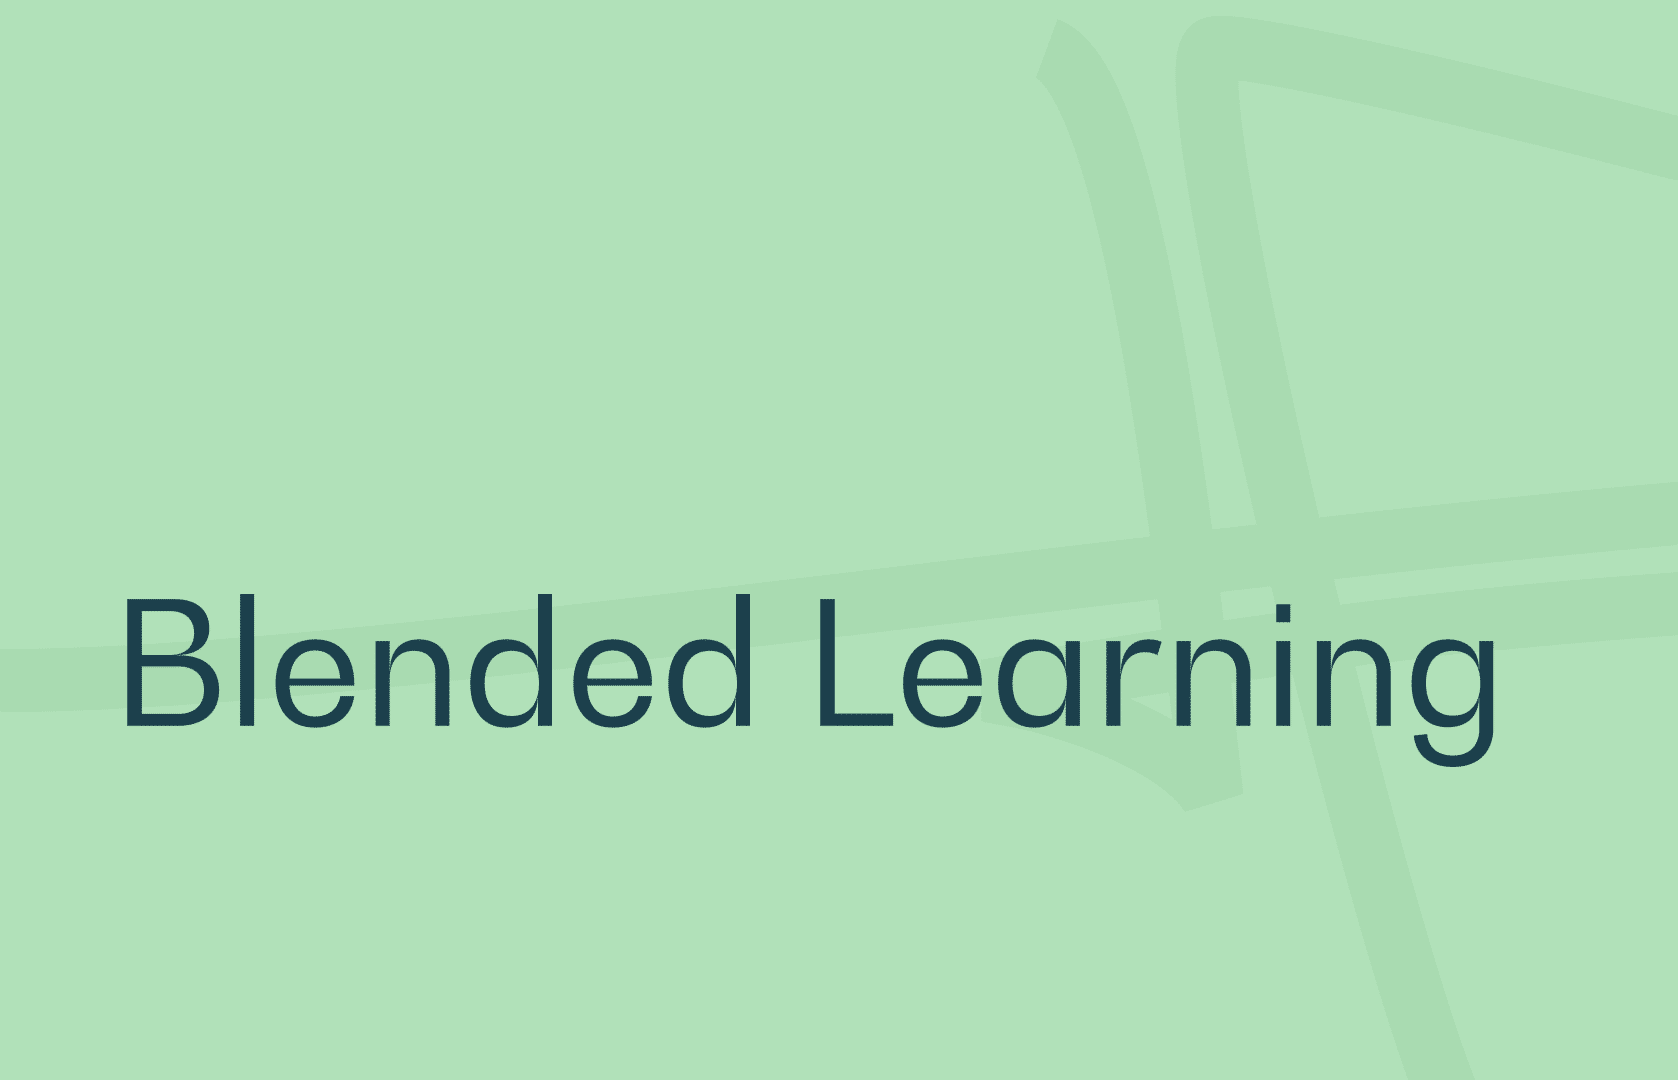 All you need to know about Blended Learning